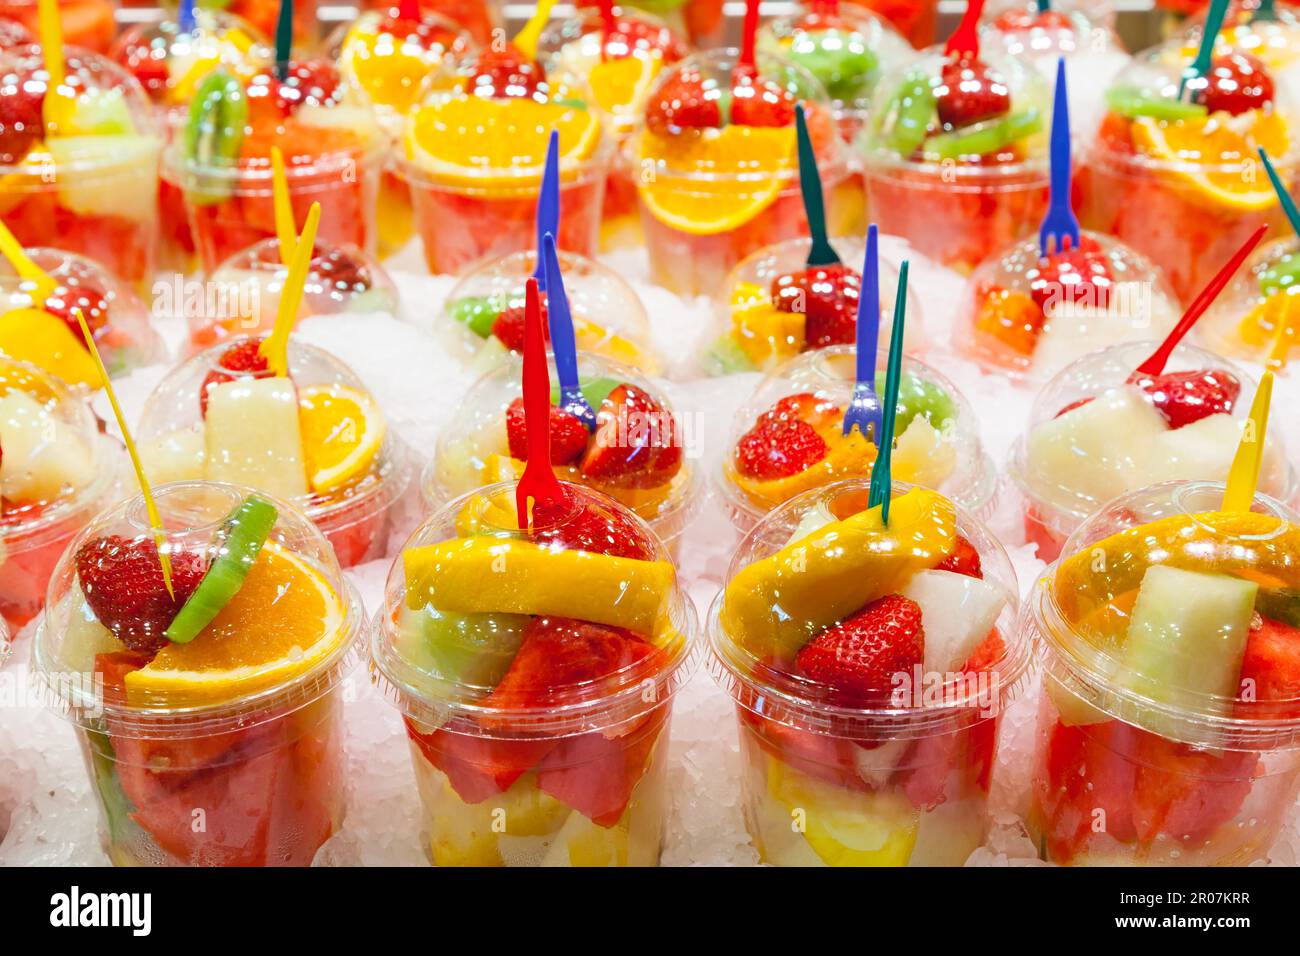 Full colors in this detail of fruit salads exposed in a Spanish market Stock Photo